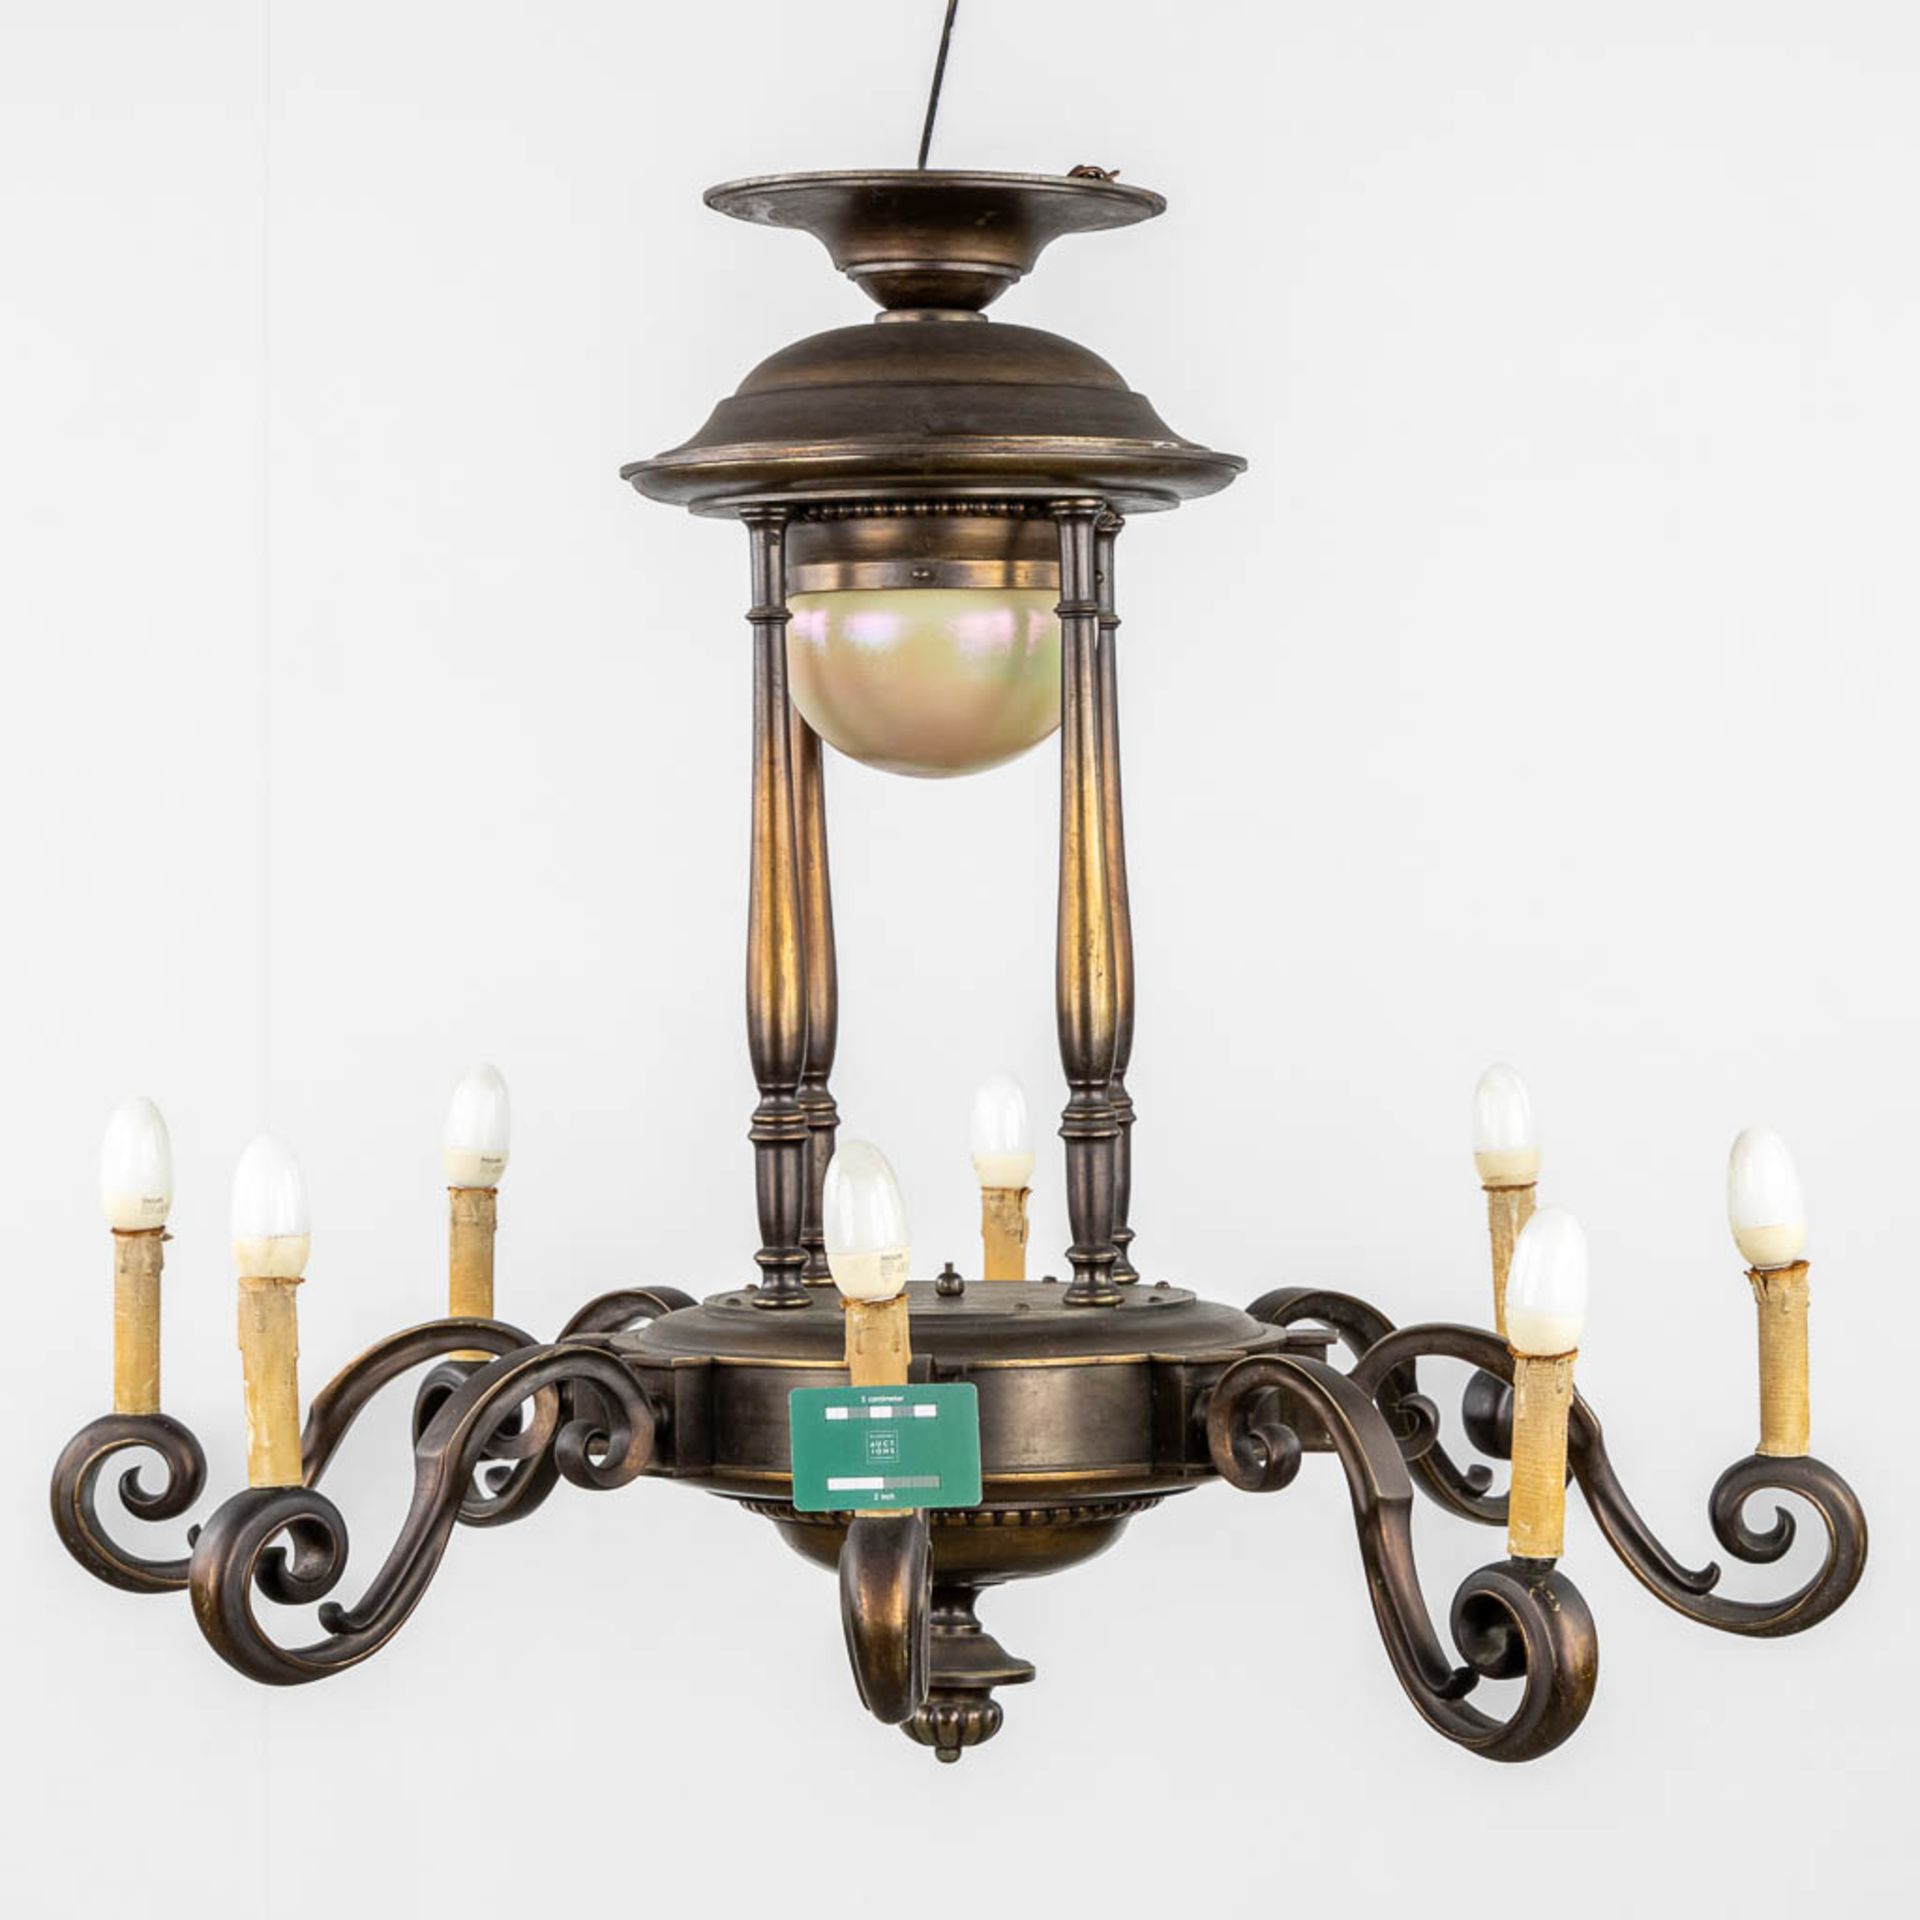 A large chandelier bronze in Art Deco style. Circa 1930. (H:85 x D:93 cm) - Image 2 of 9